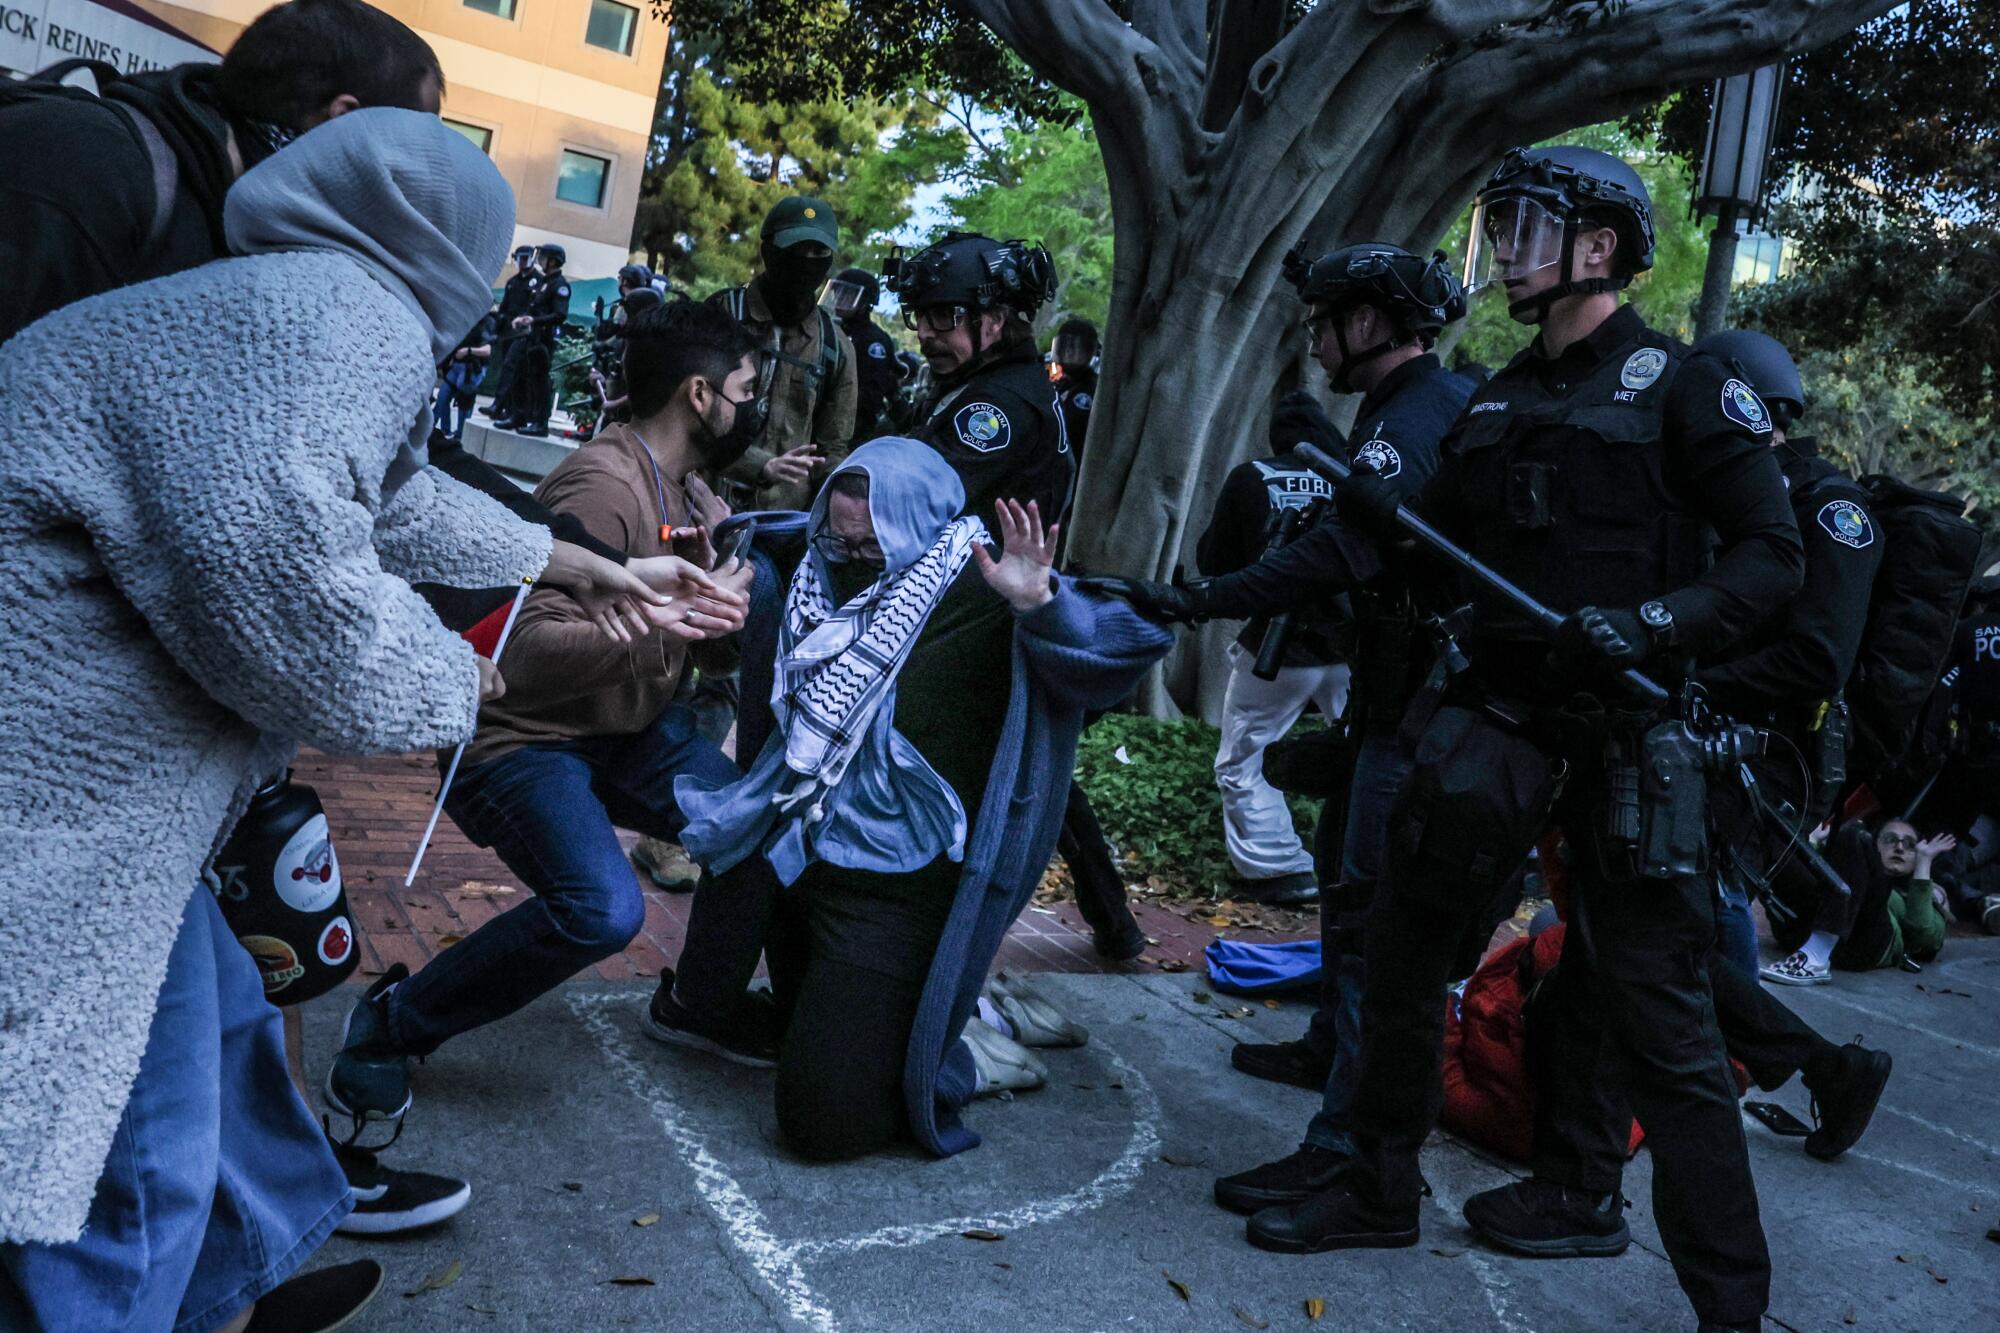 Police grab a kneeling protester as they break up a demonstration at UC Irvine.